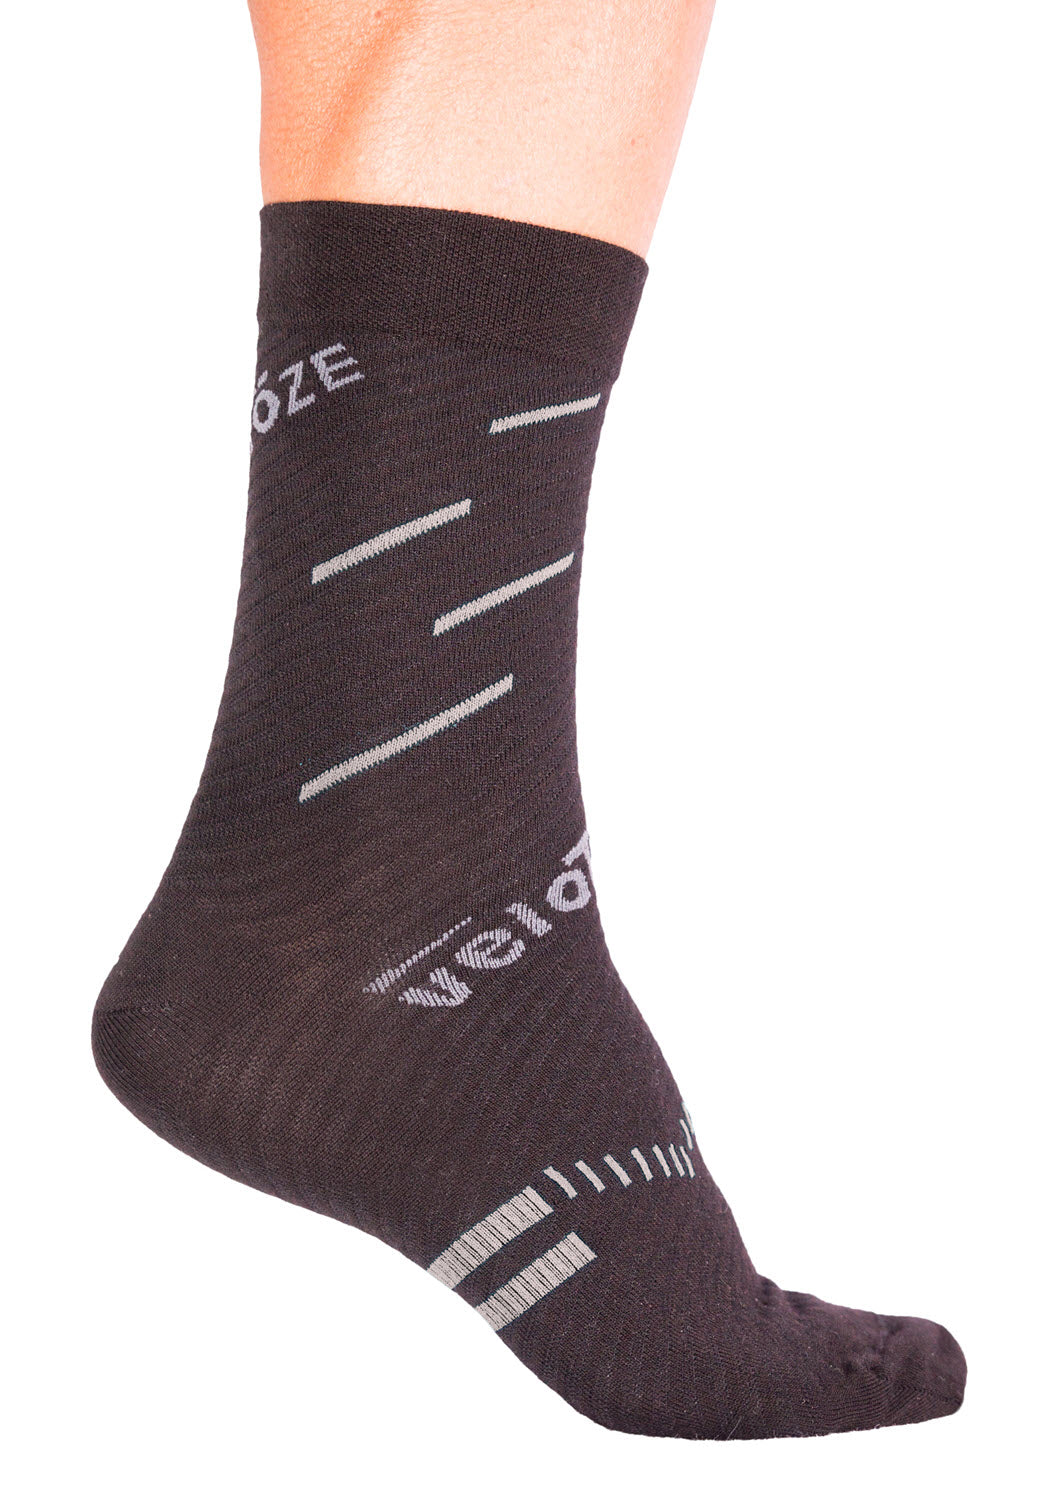 veloToze Cycling Socks - Active Compression with Coolmax